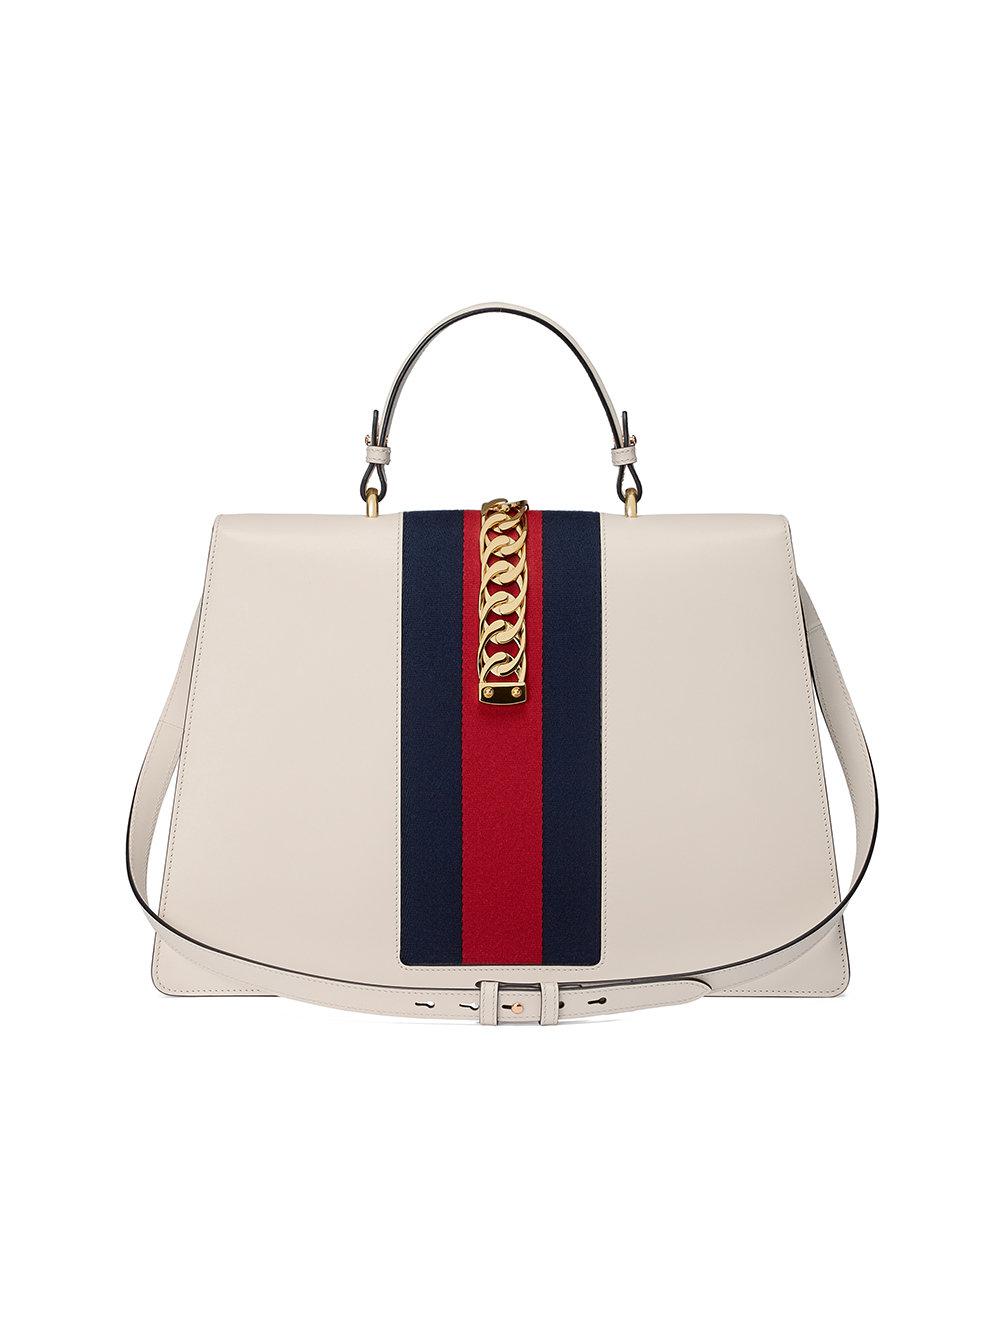 Gucci Sylvie Leather Top Handle Bag in White | Lyst